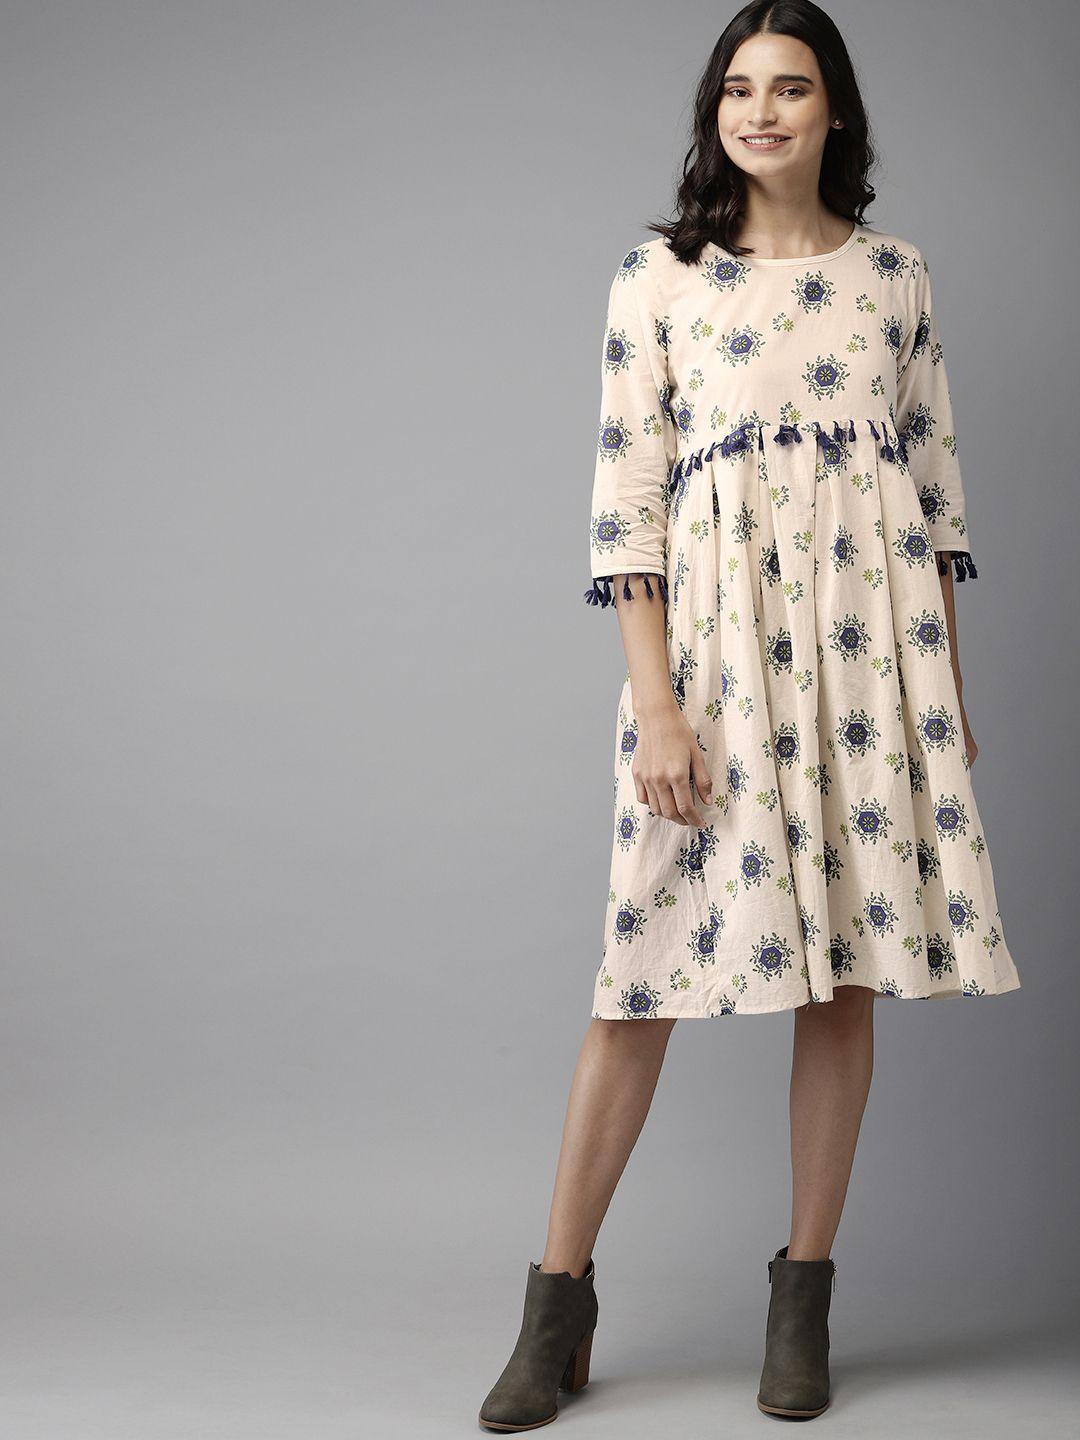 here&now women printed cream-coloured & navy blue a-line dress